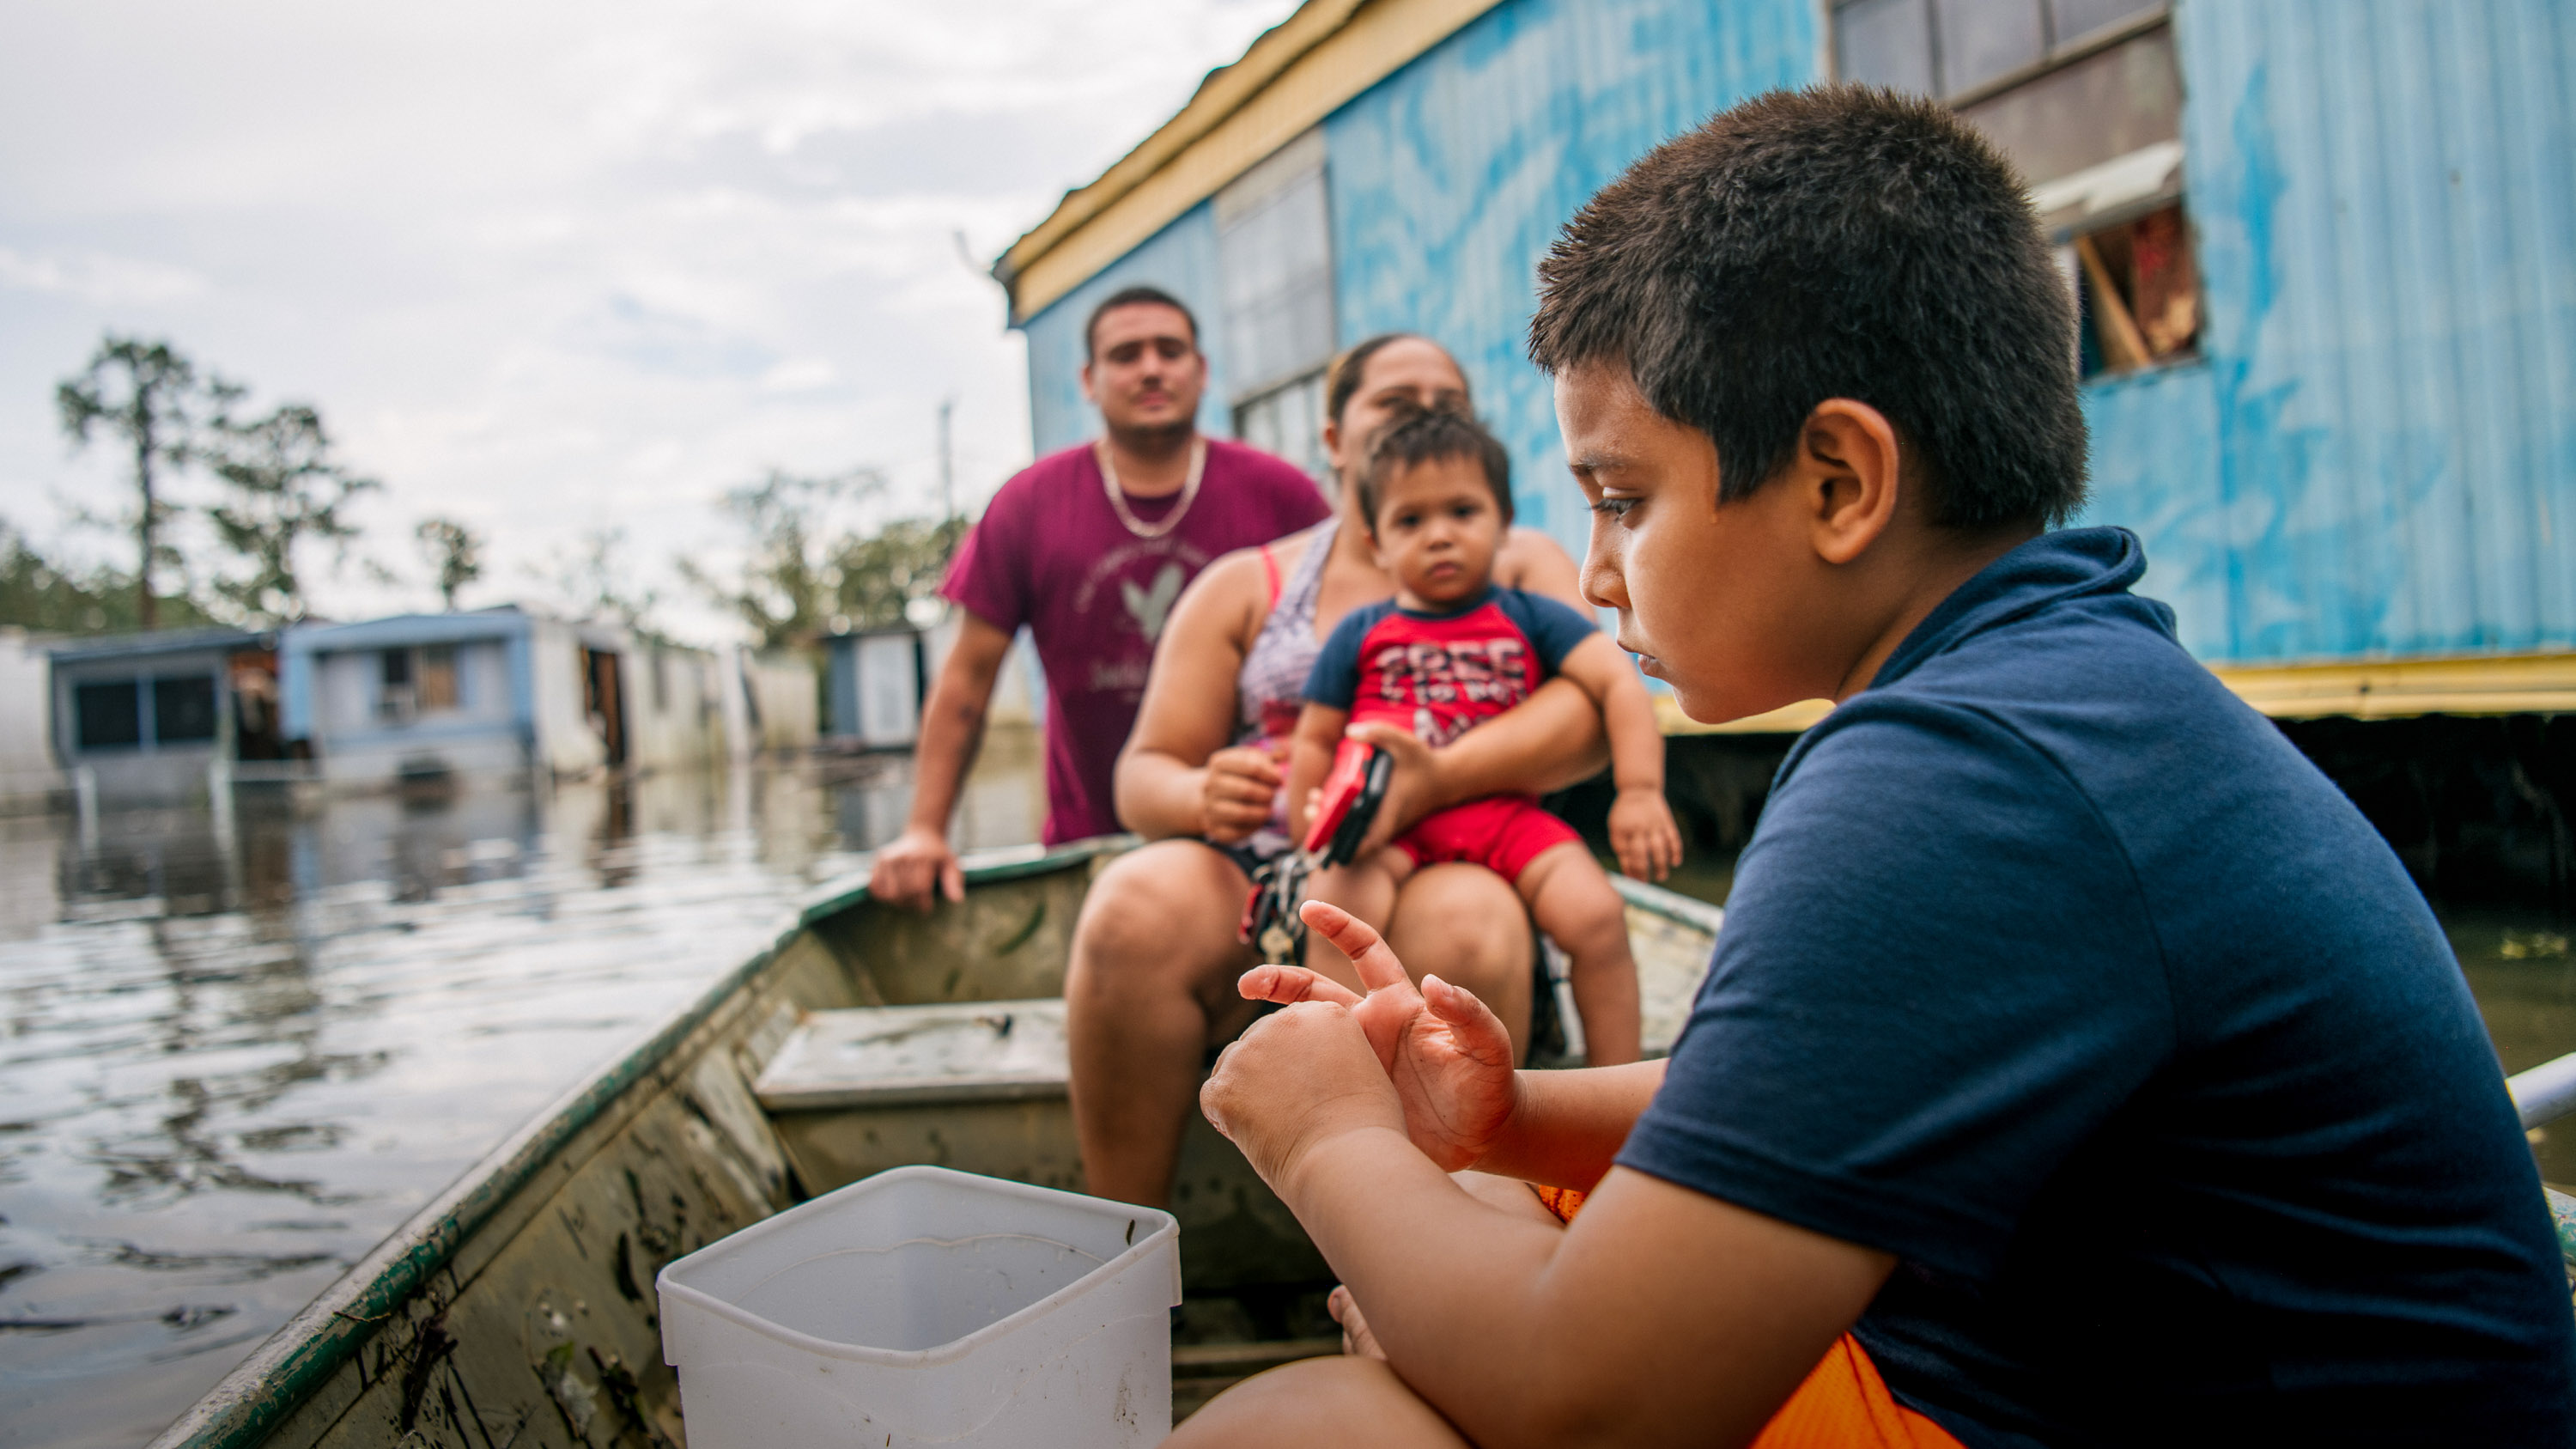 Father and his two small children in a boat surrounded by flooded homes